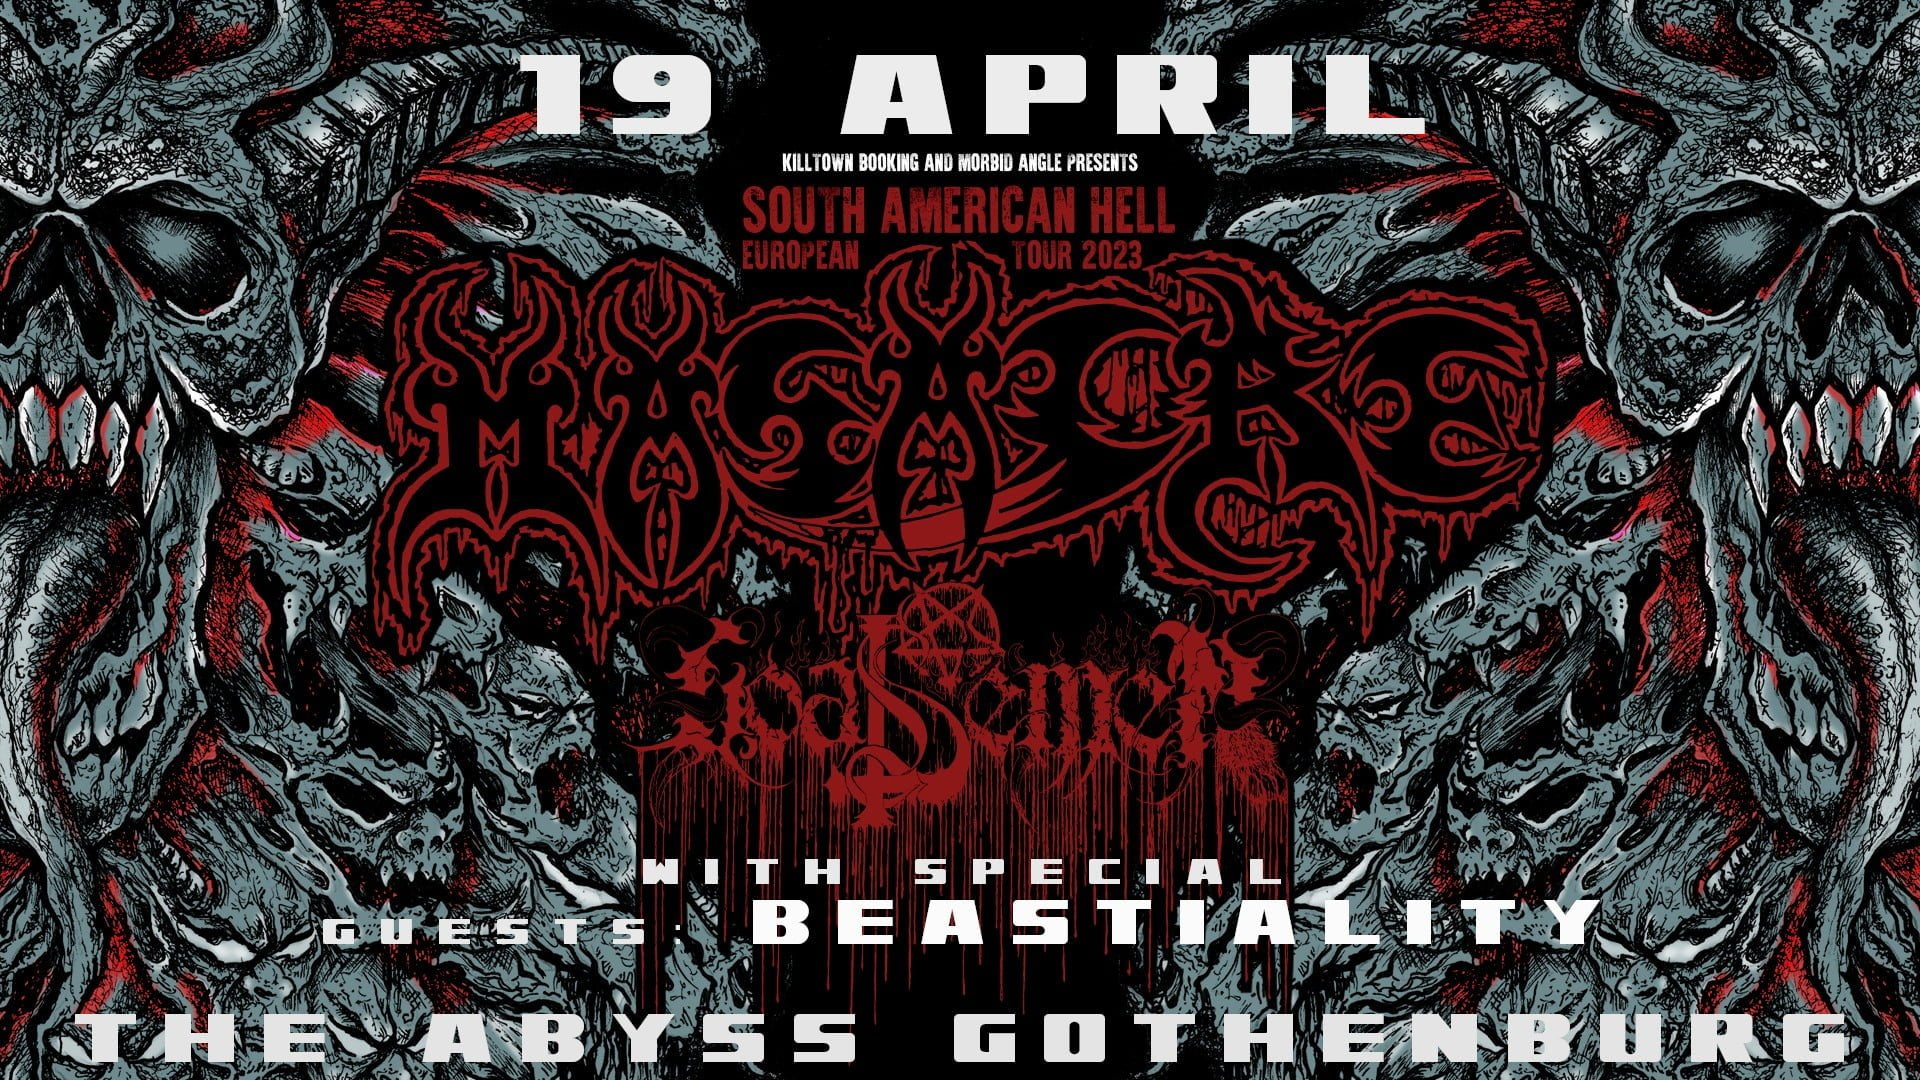 The Abyss - Masacre - Goat Semon - Beastiality